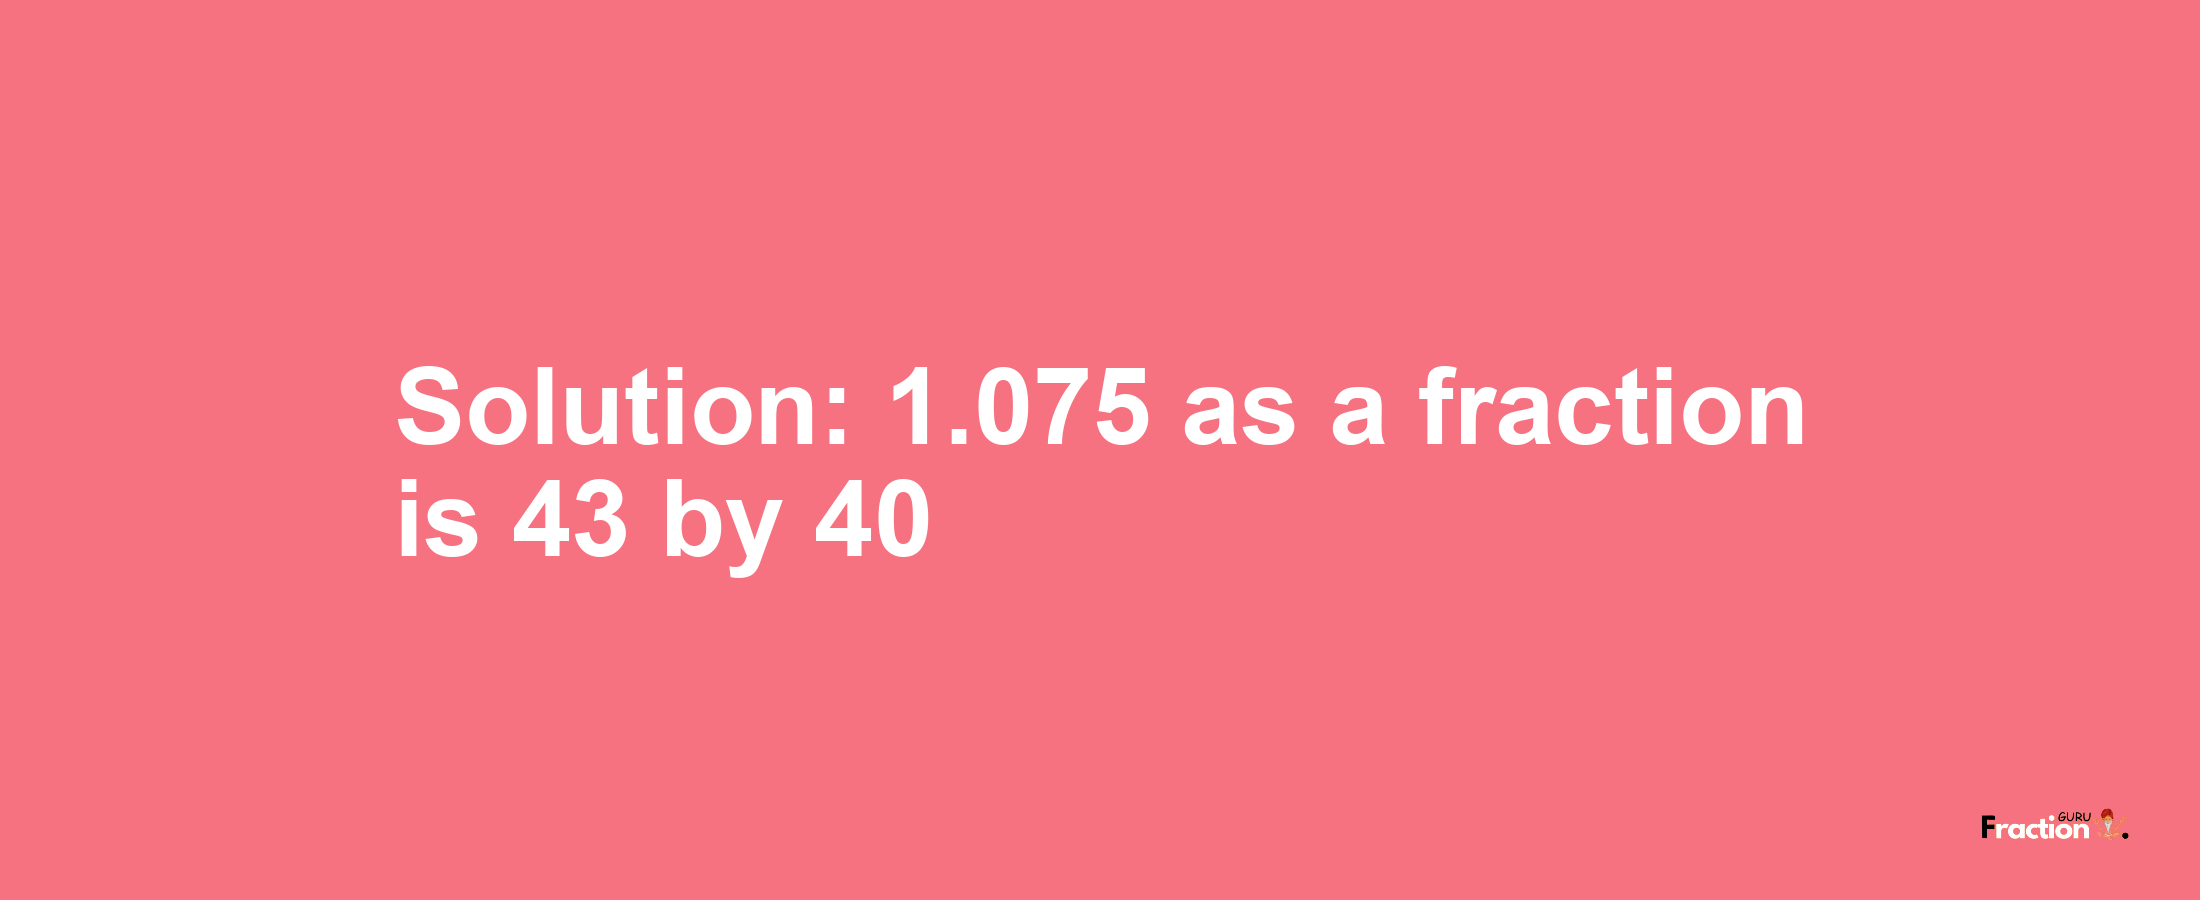 Solution:1.075 as a fraction is 43/40